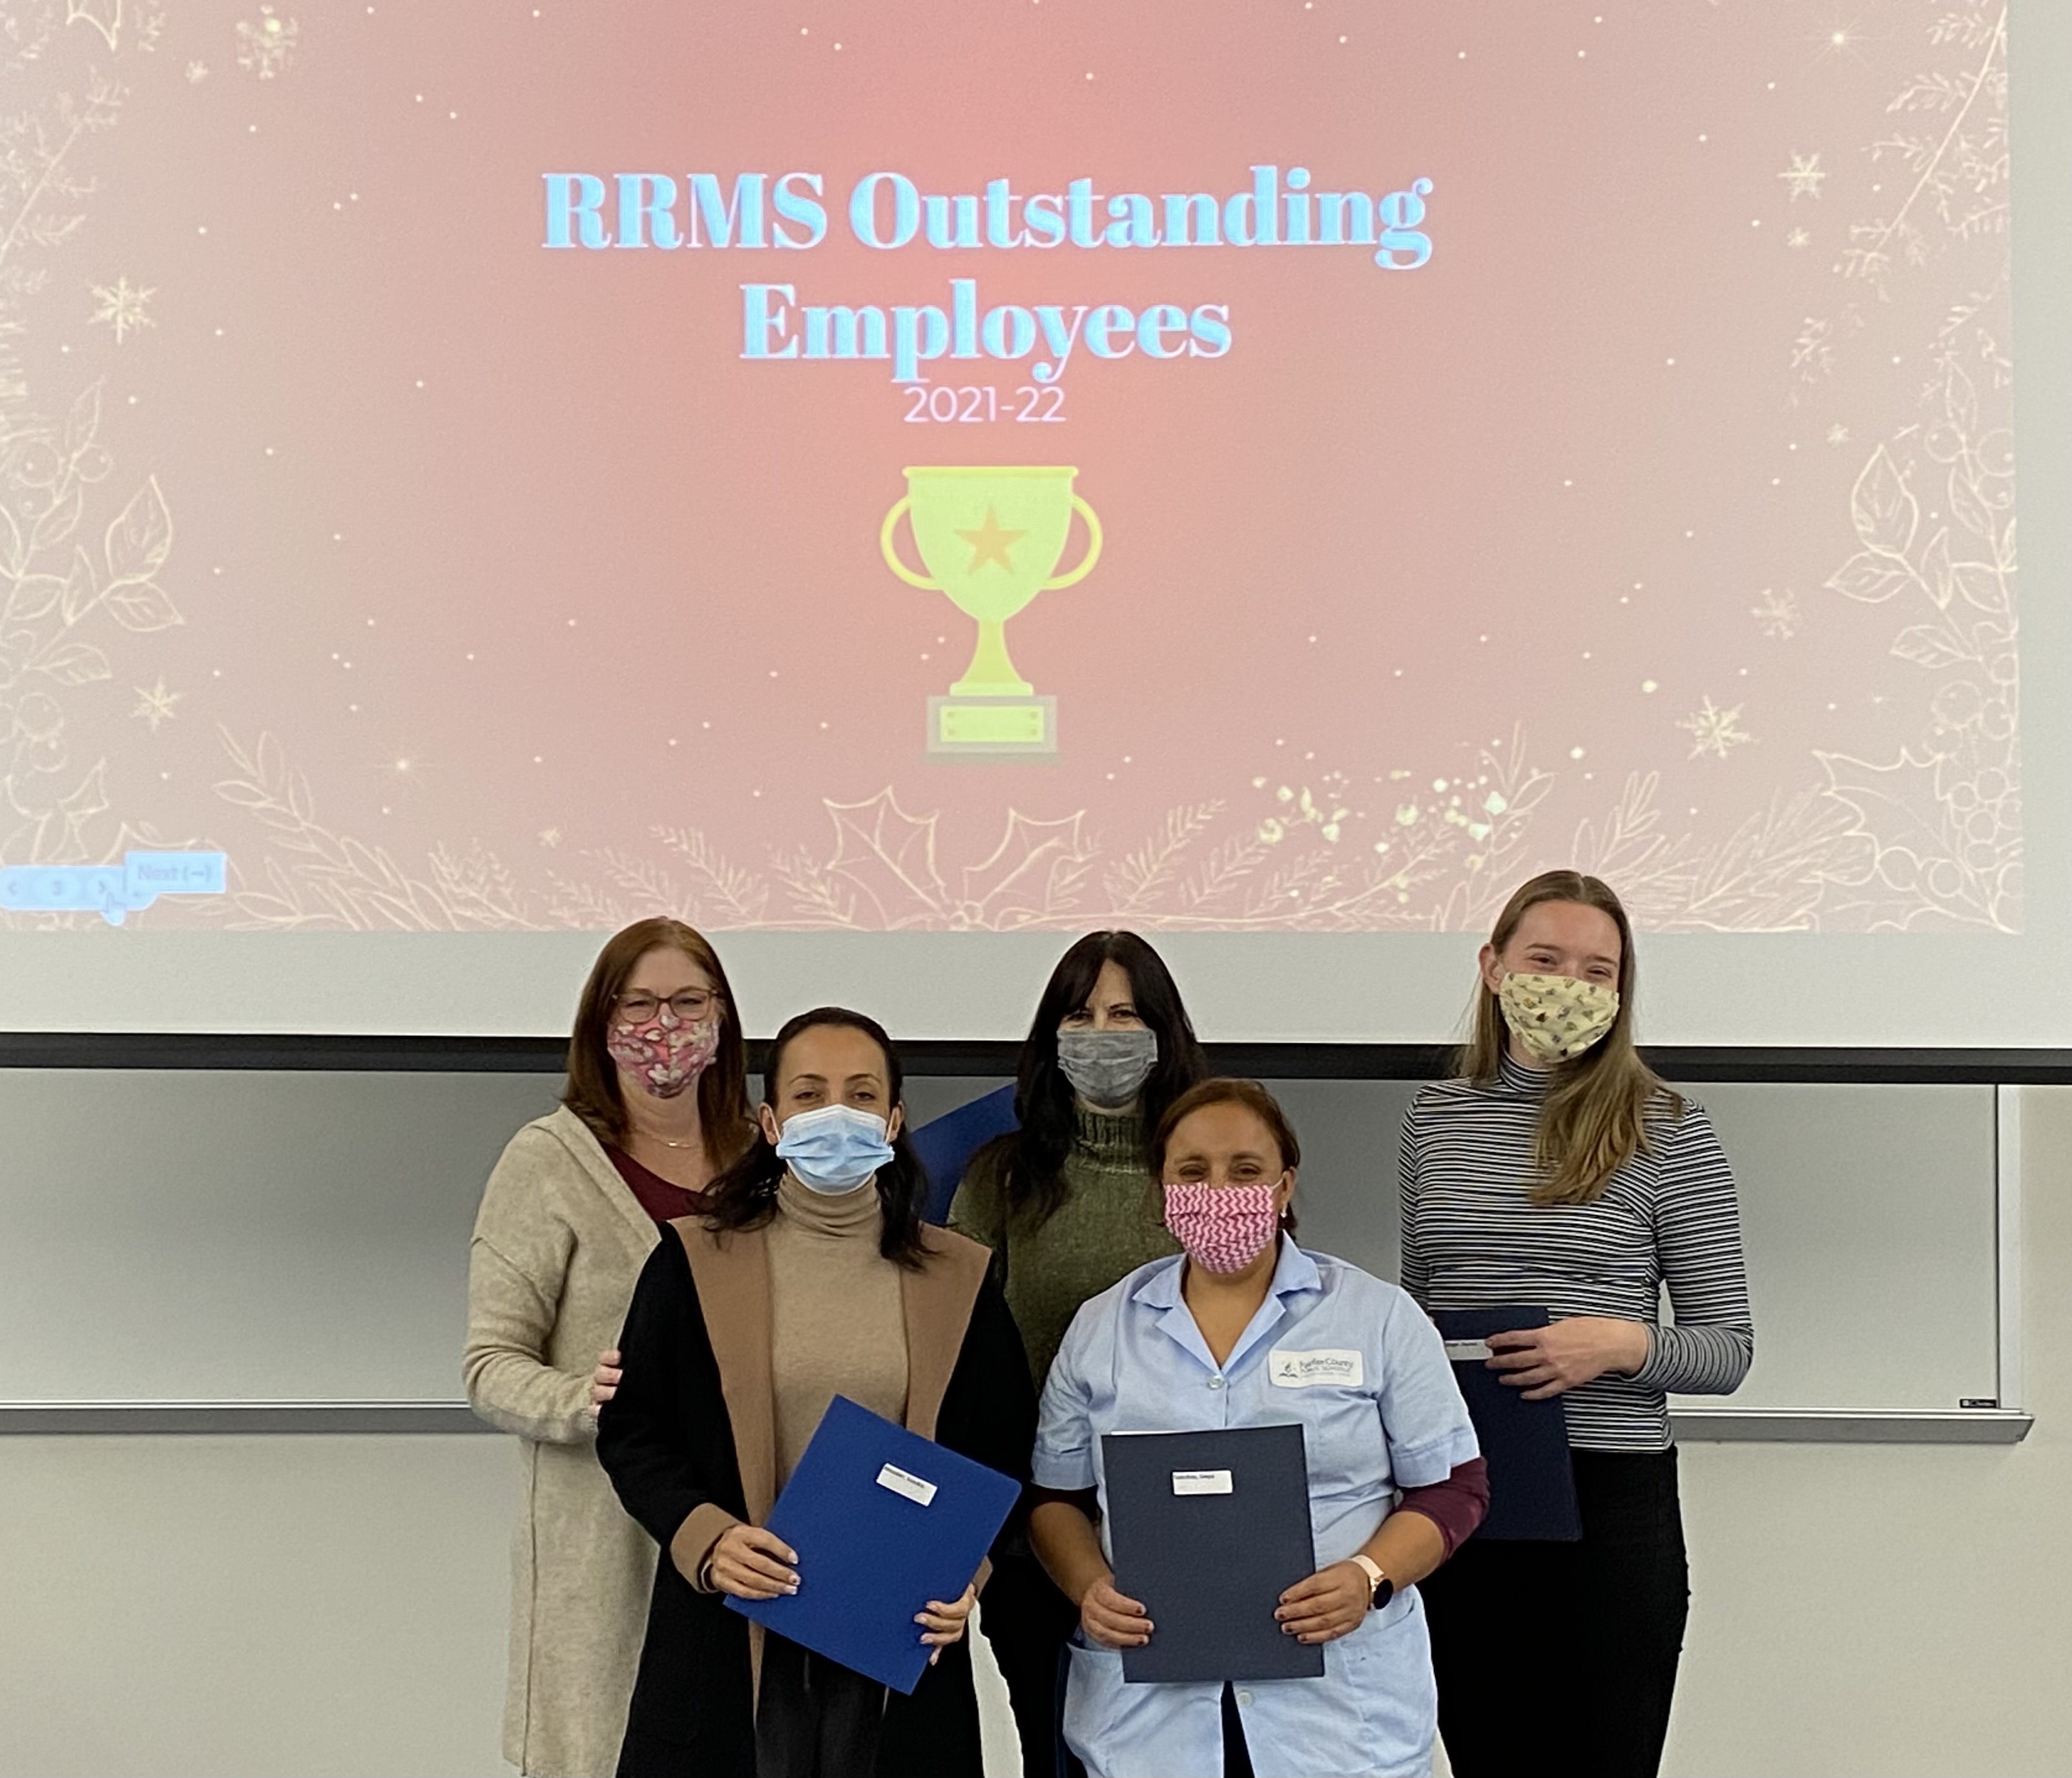 image of rrms outstanding employees